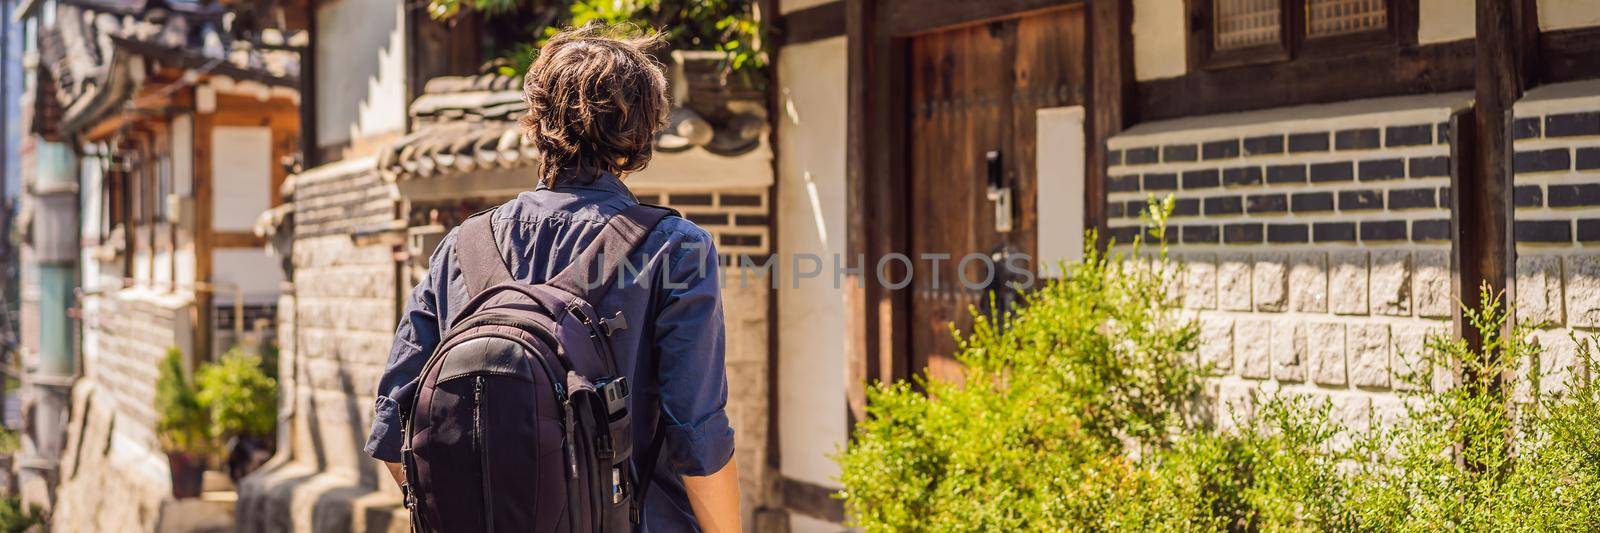 Young man tourist in Bukchon Hanok Village is one of the famous place for Korean traditional houses have been preserved. Travel to Korea Concept. BANNER, LONG FORMAT